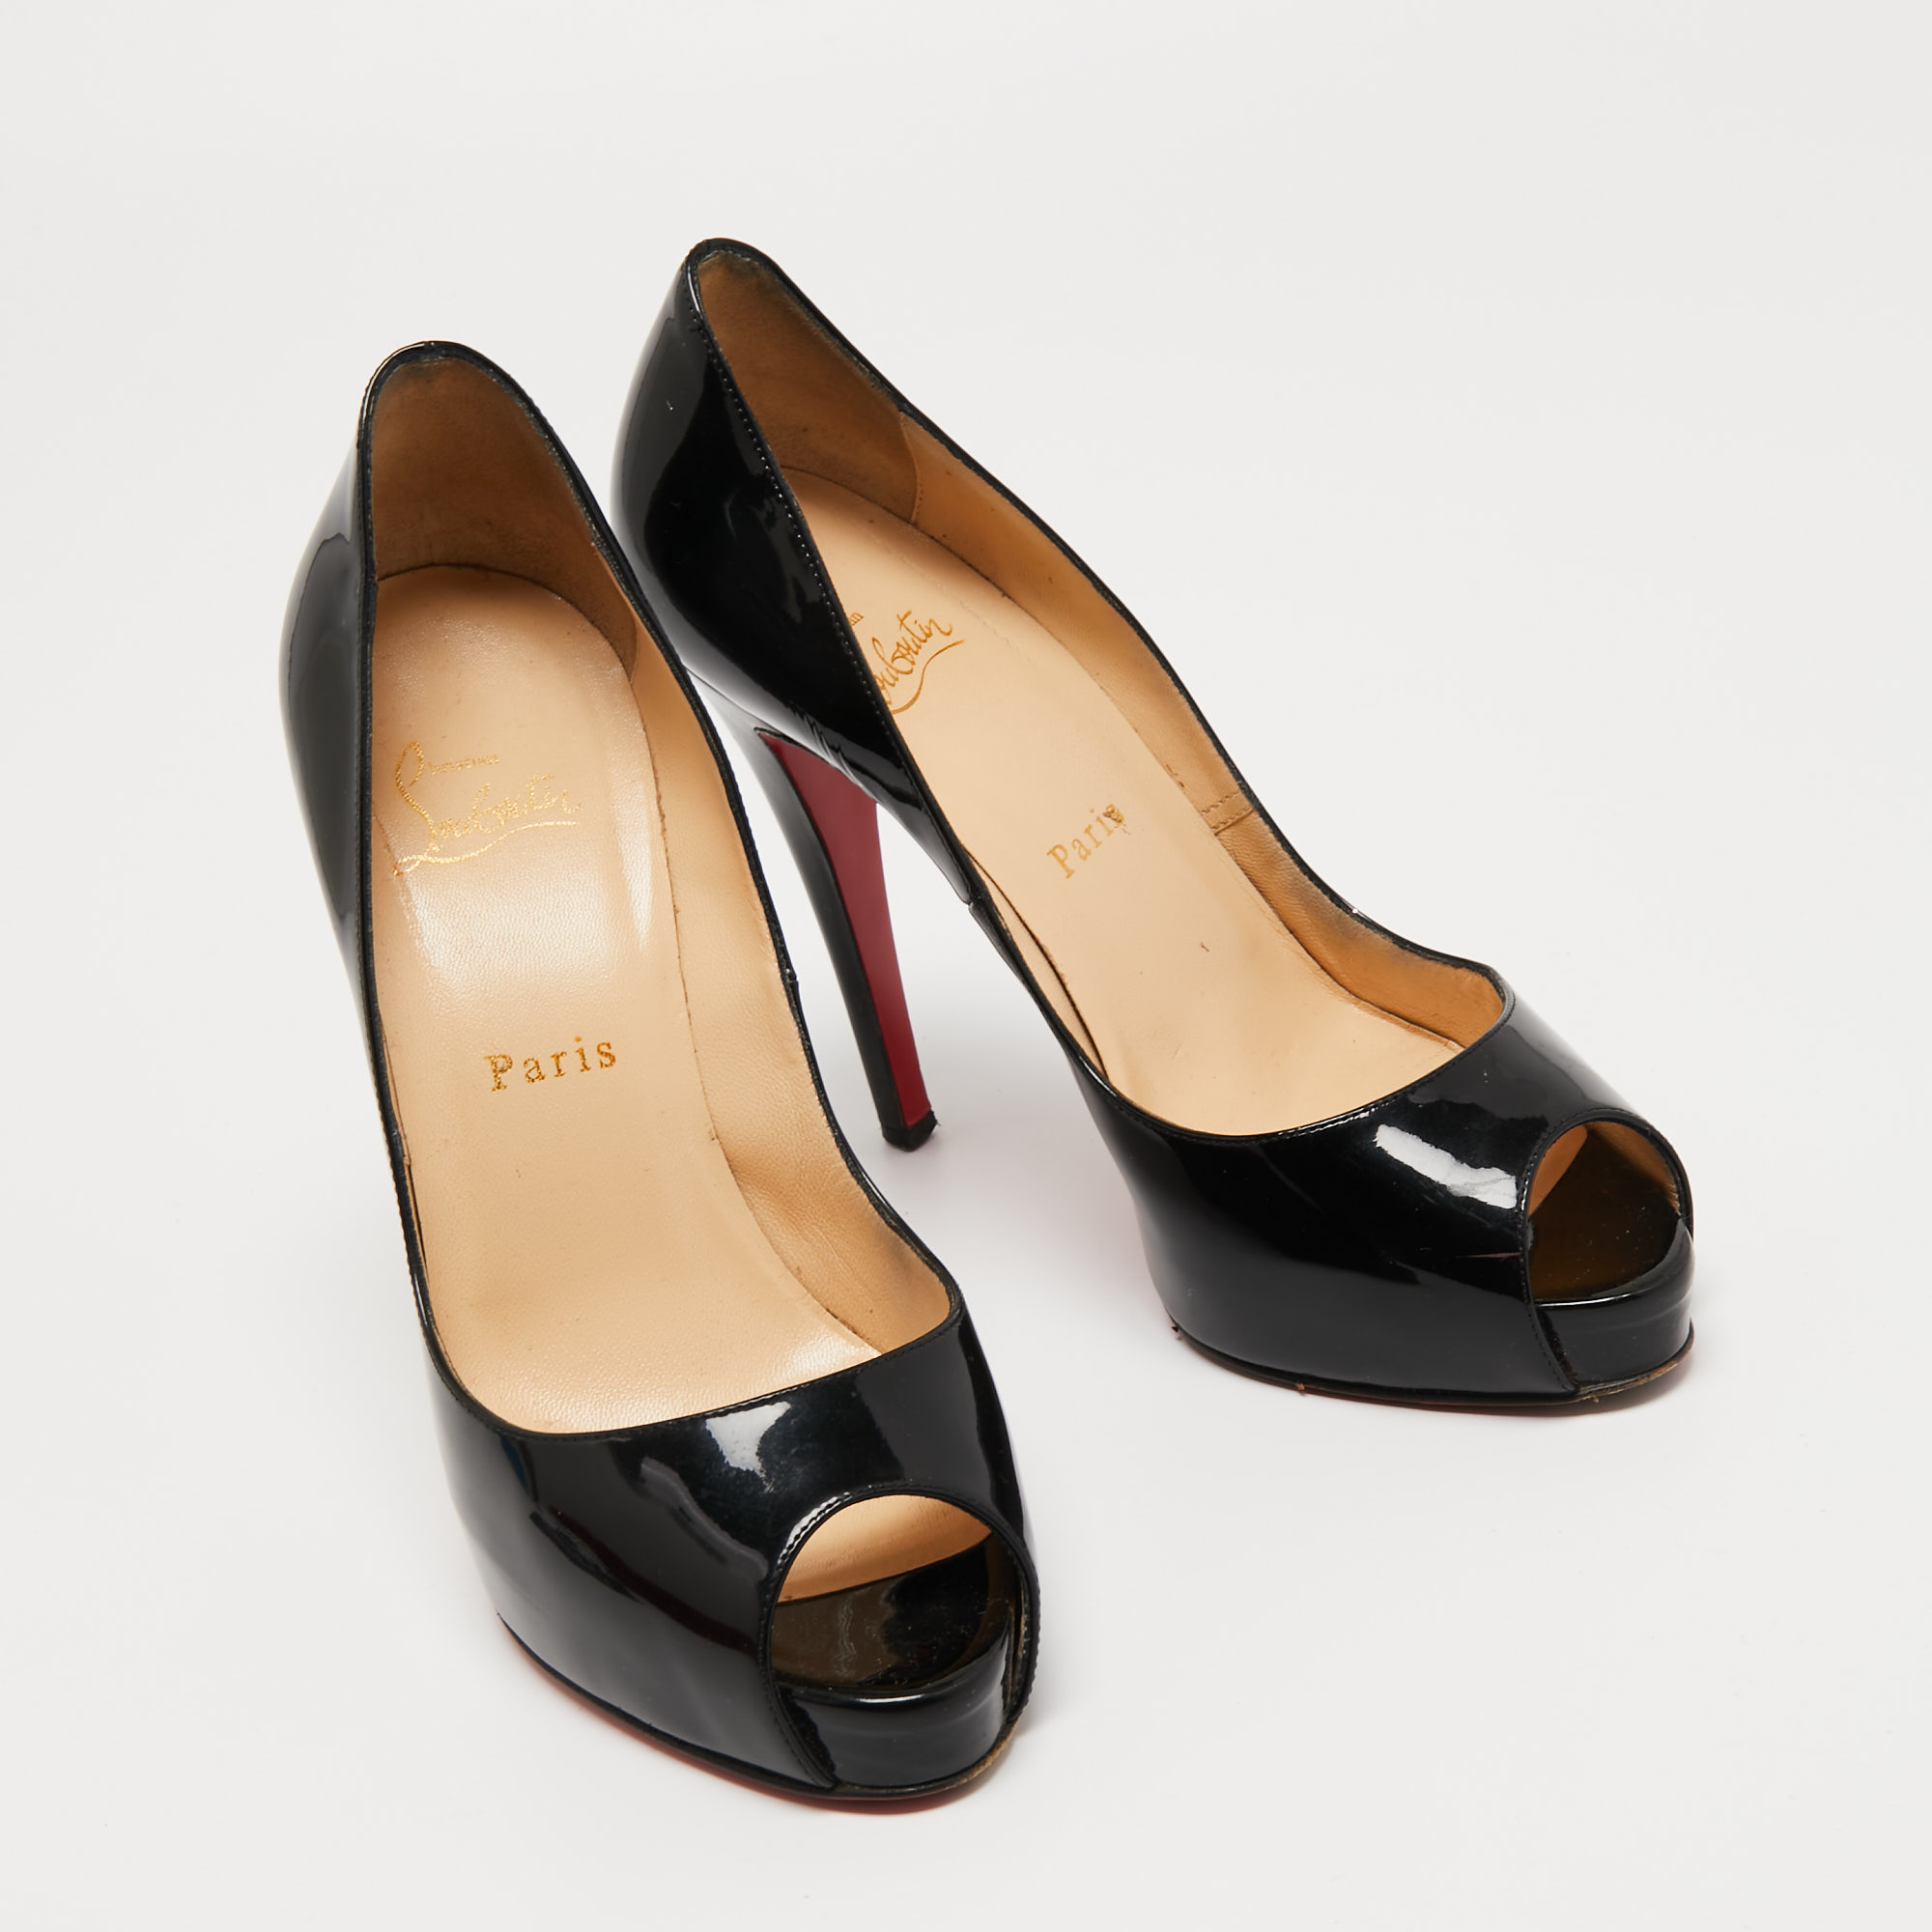 Christian Louboutin Black Patent Leather New Very Prive Pumps Size 38